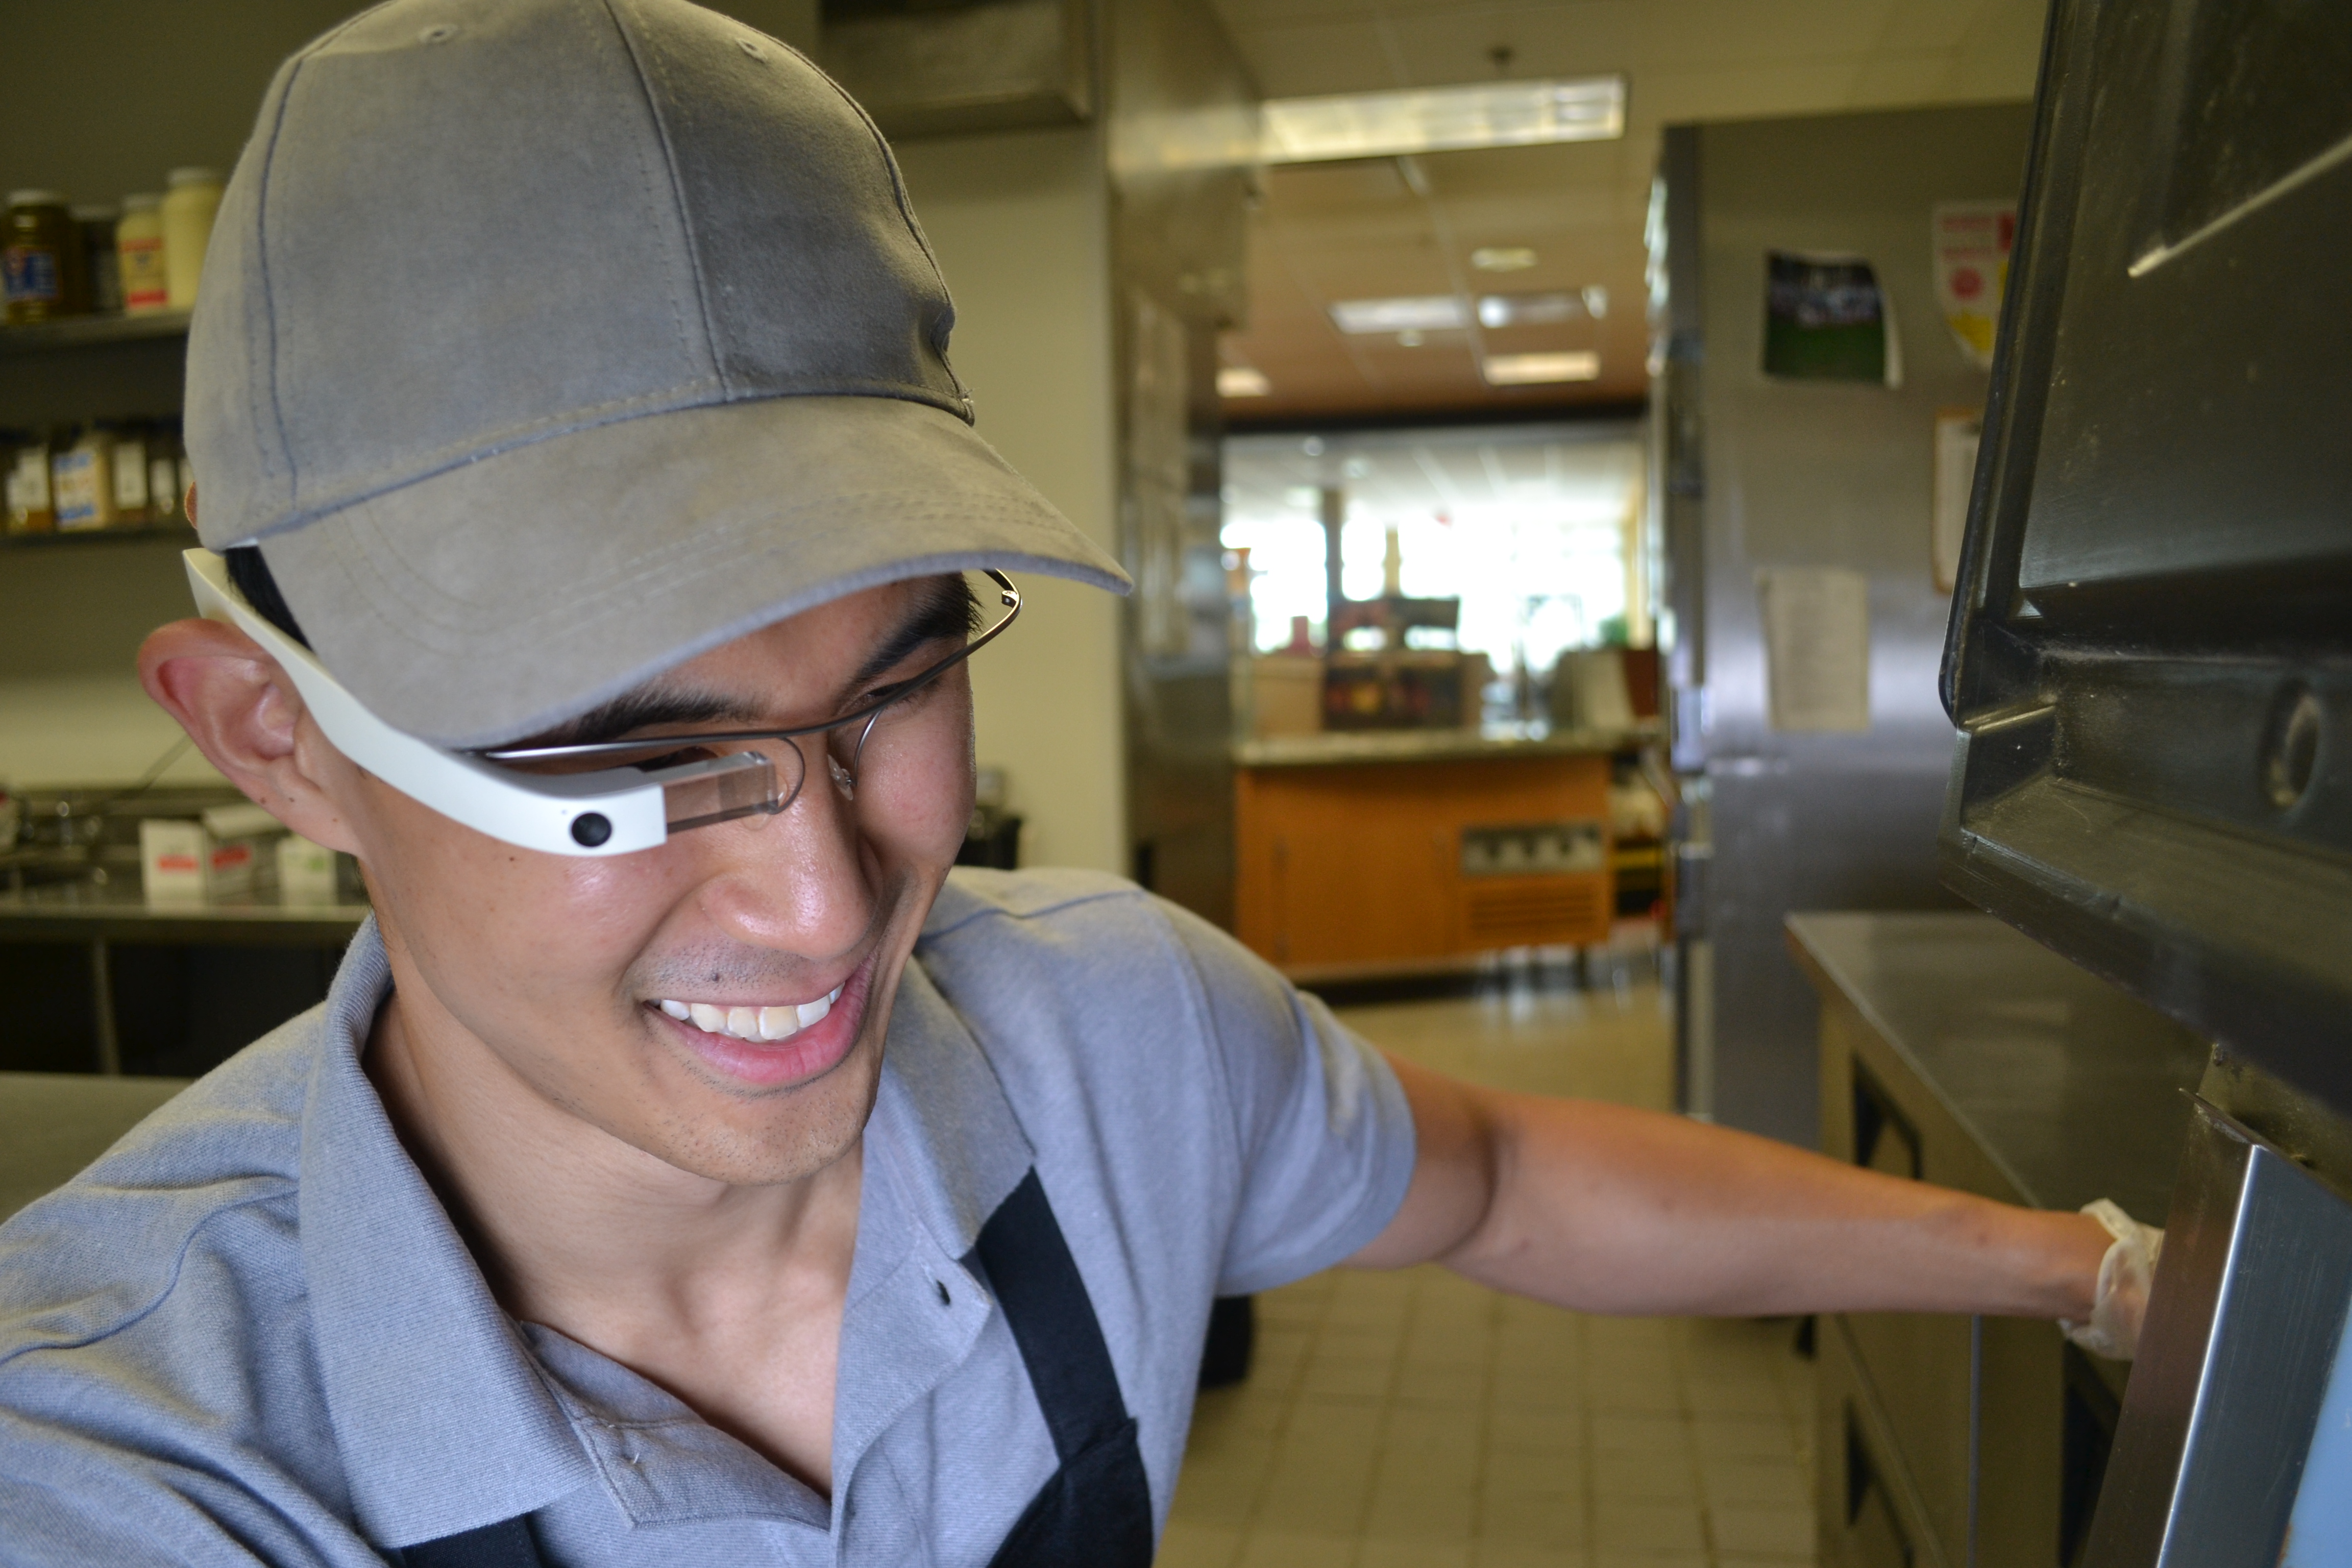 As a Glass Partner and the first food industry application of the wearable device, EyeSucceed provides a one-of-a-kind, hands-free training module. Glass is worn by the user like a pair of eye glasses and an optical display located in the user’s field of vision displays training content. Users navigate through the step-by-step instructions using voice commands or a scroll pad embedded in the side frame.